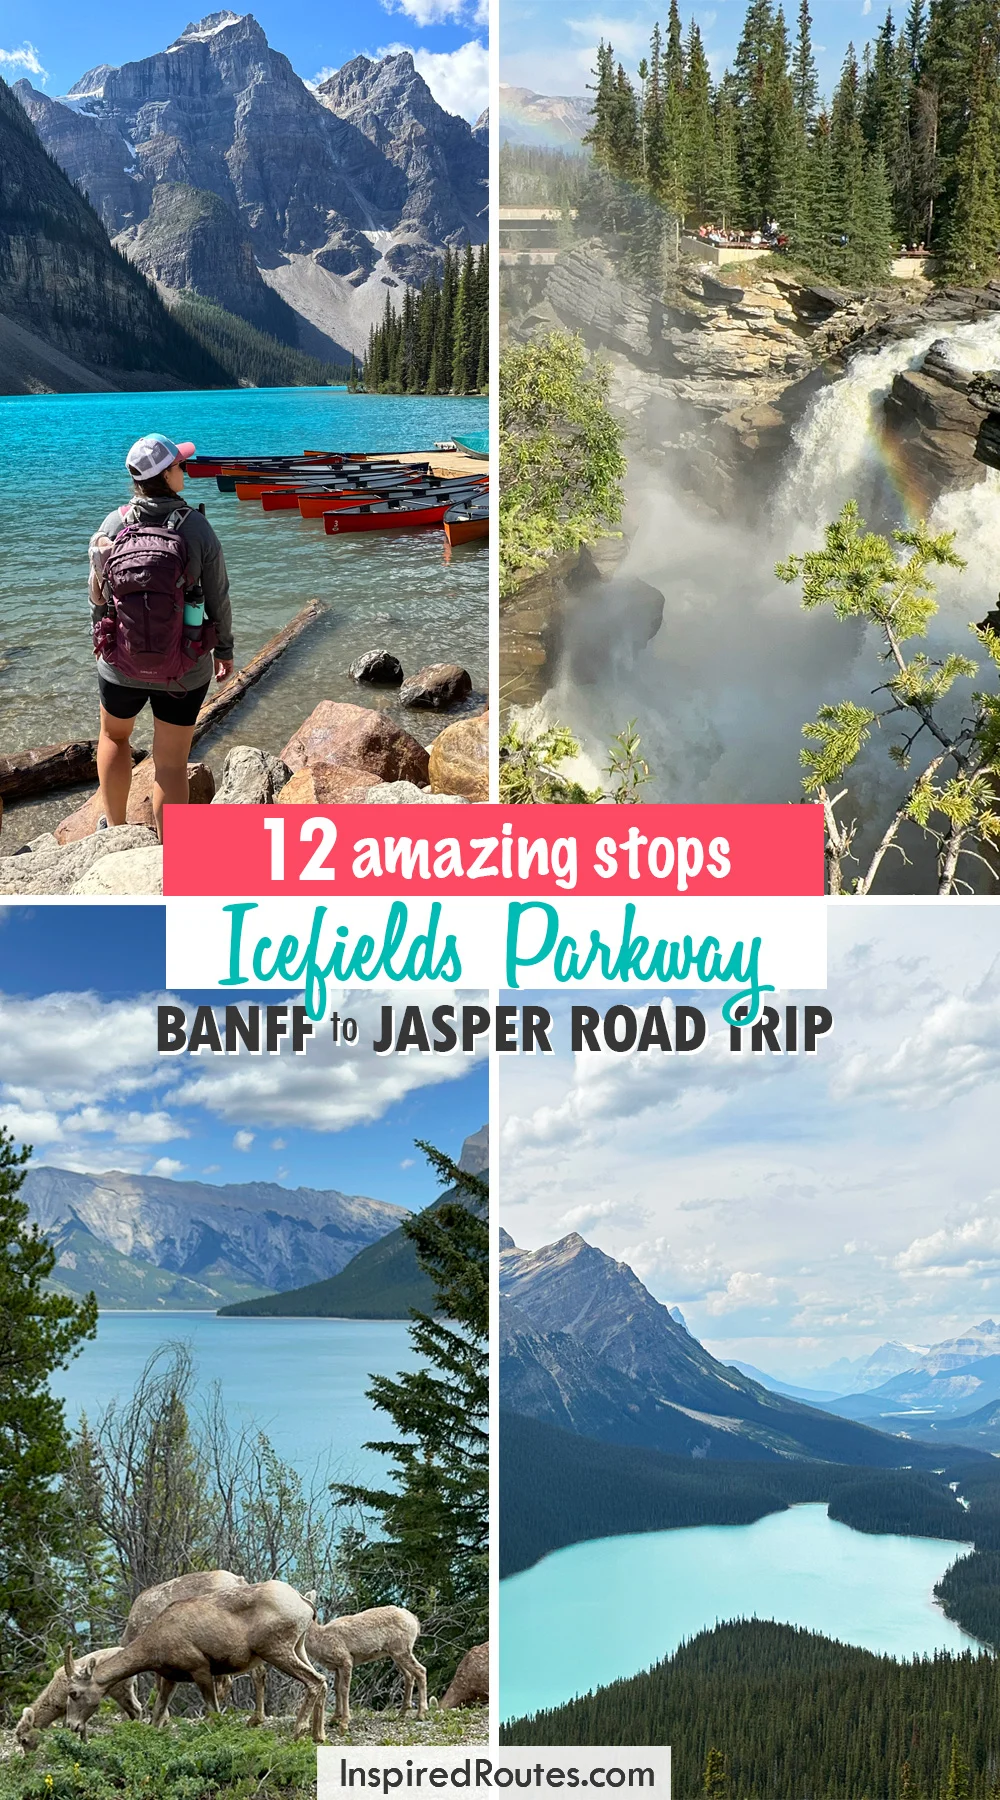 12 amazing stops icefields parkway banff to jasper road trip with 4 images of woman at lake waterfall goats at lake and lake with mountains